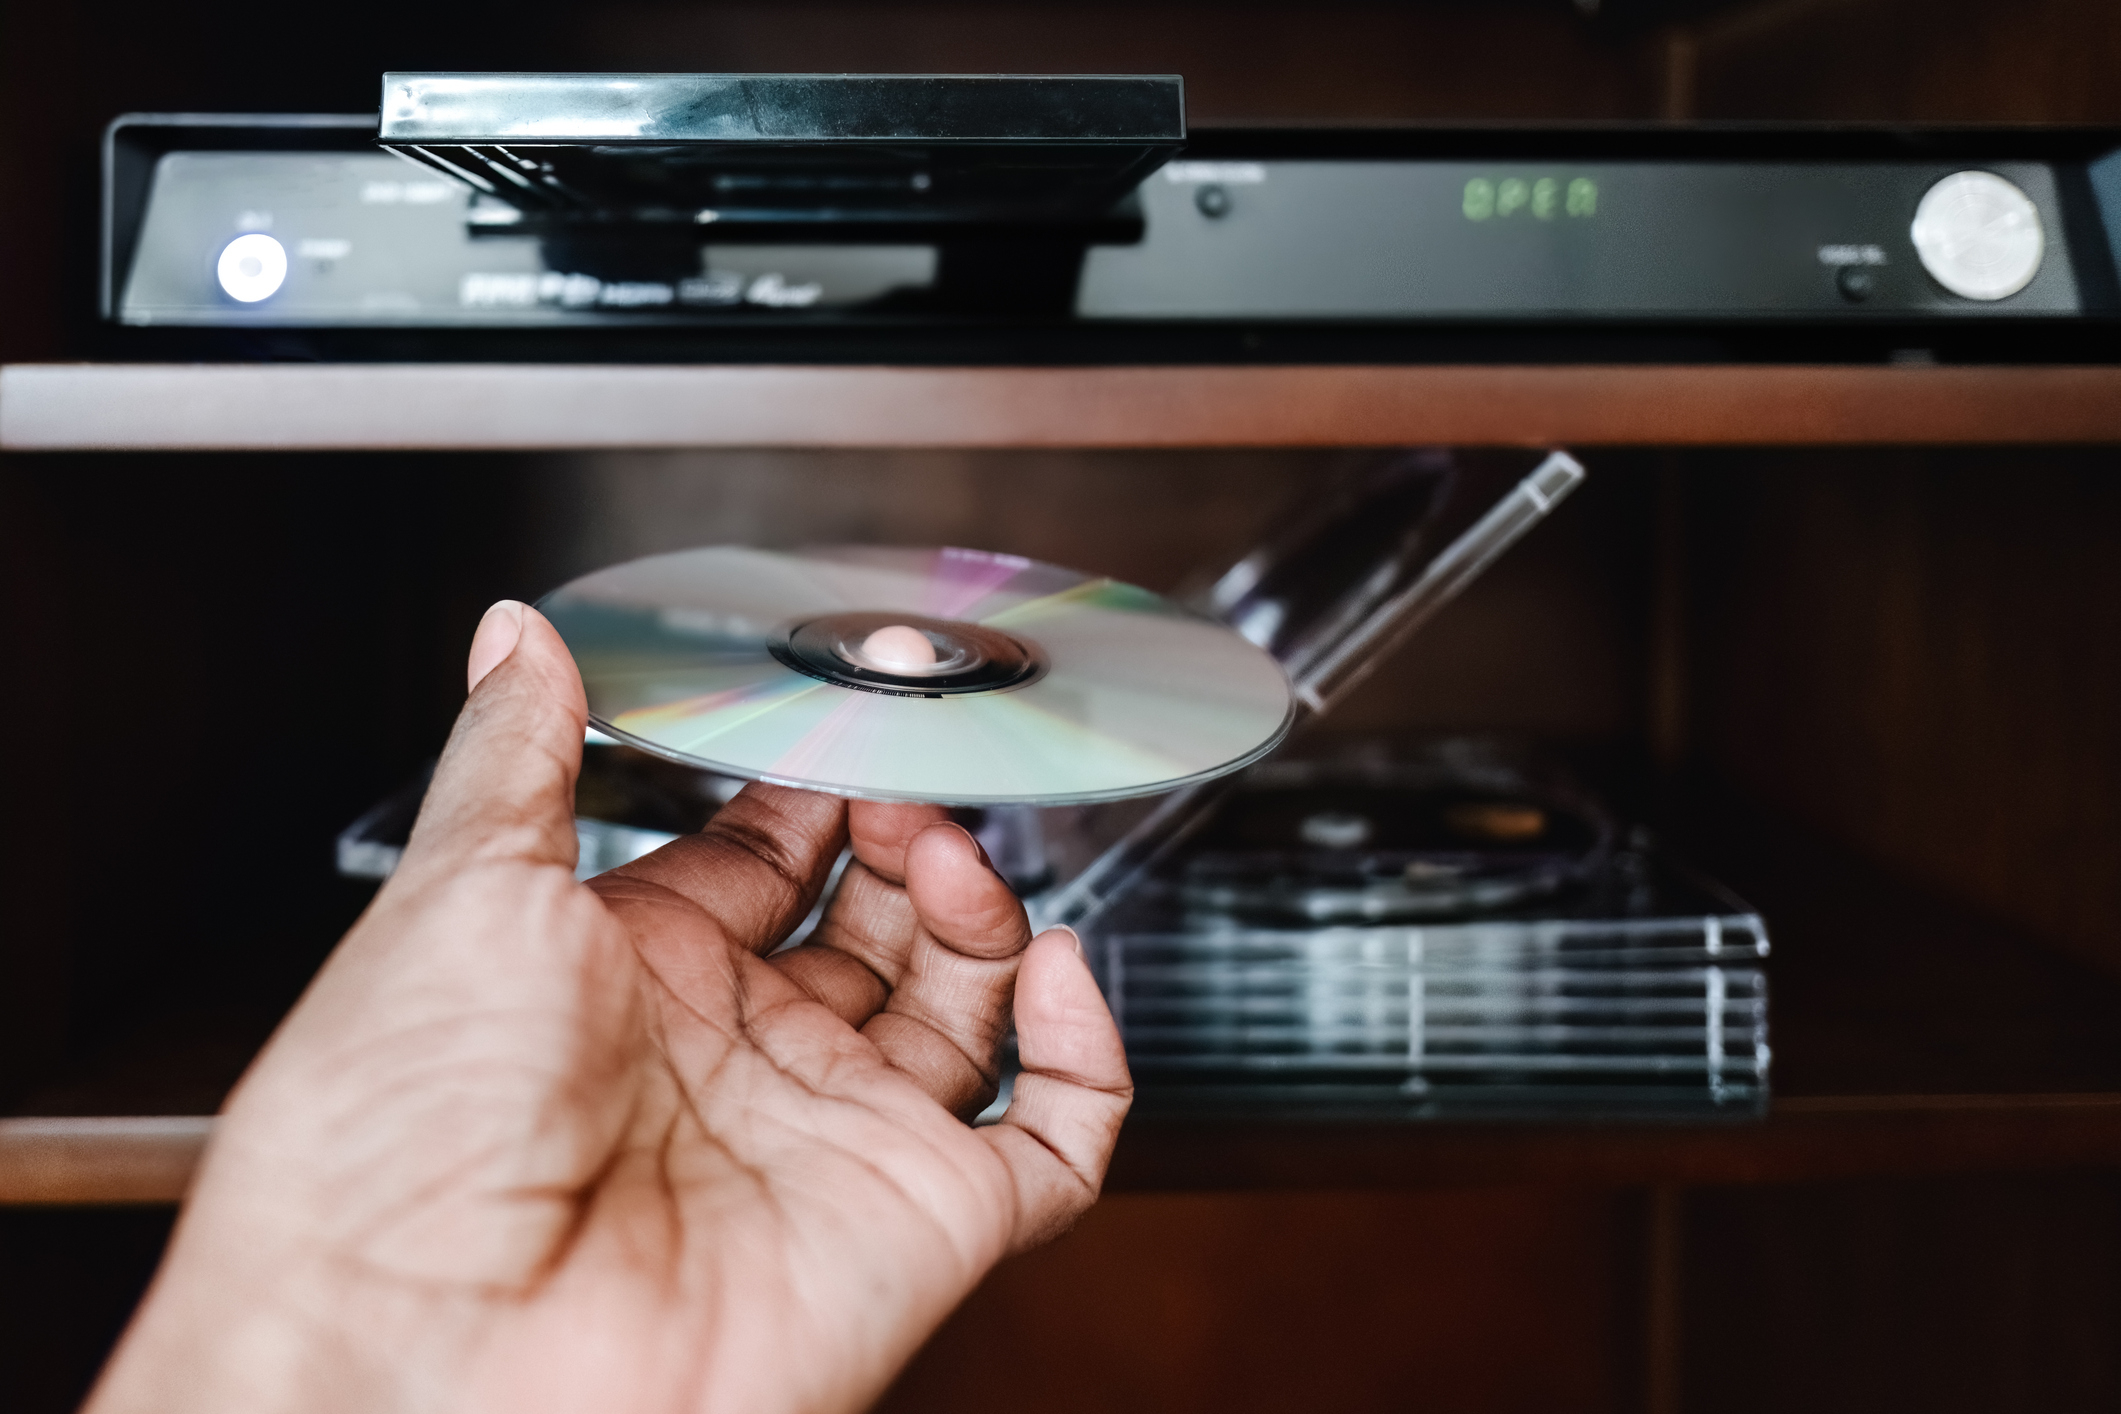 A hand inserting a DVD into a DVD player shelf, with several other DVDs visible. The DVD player is turned on